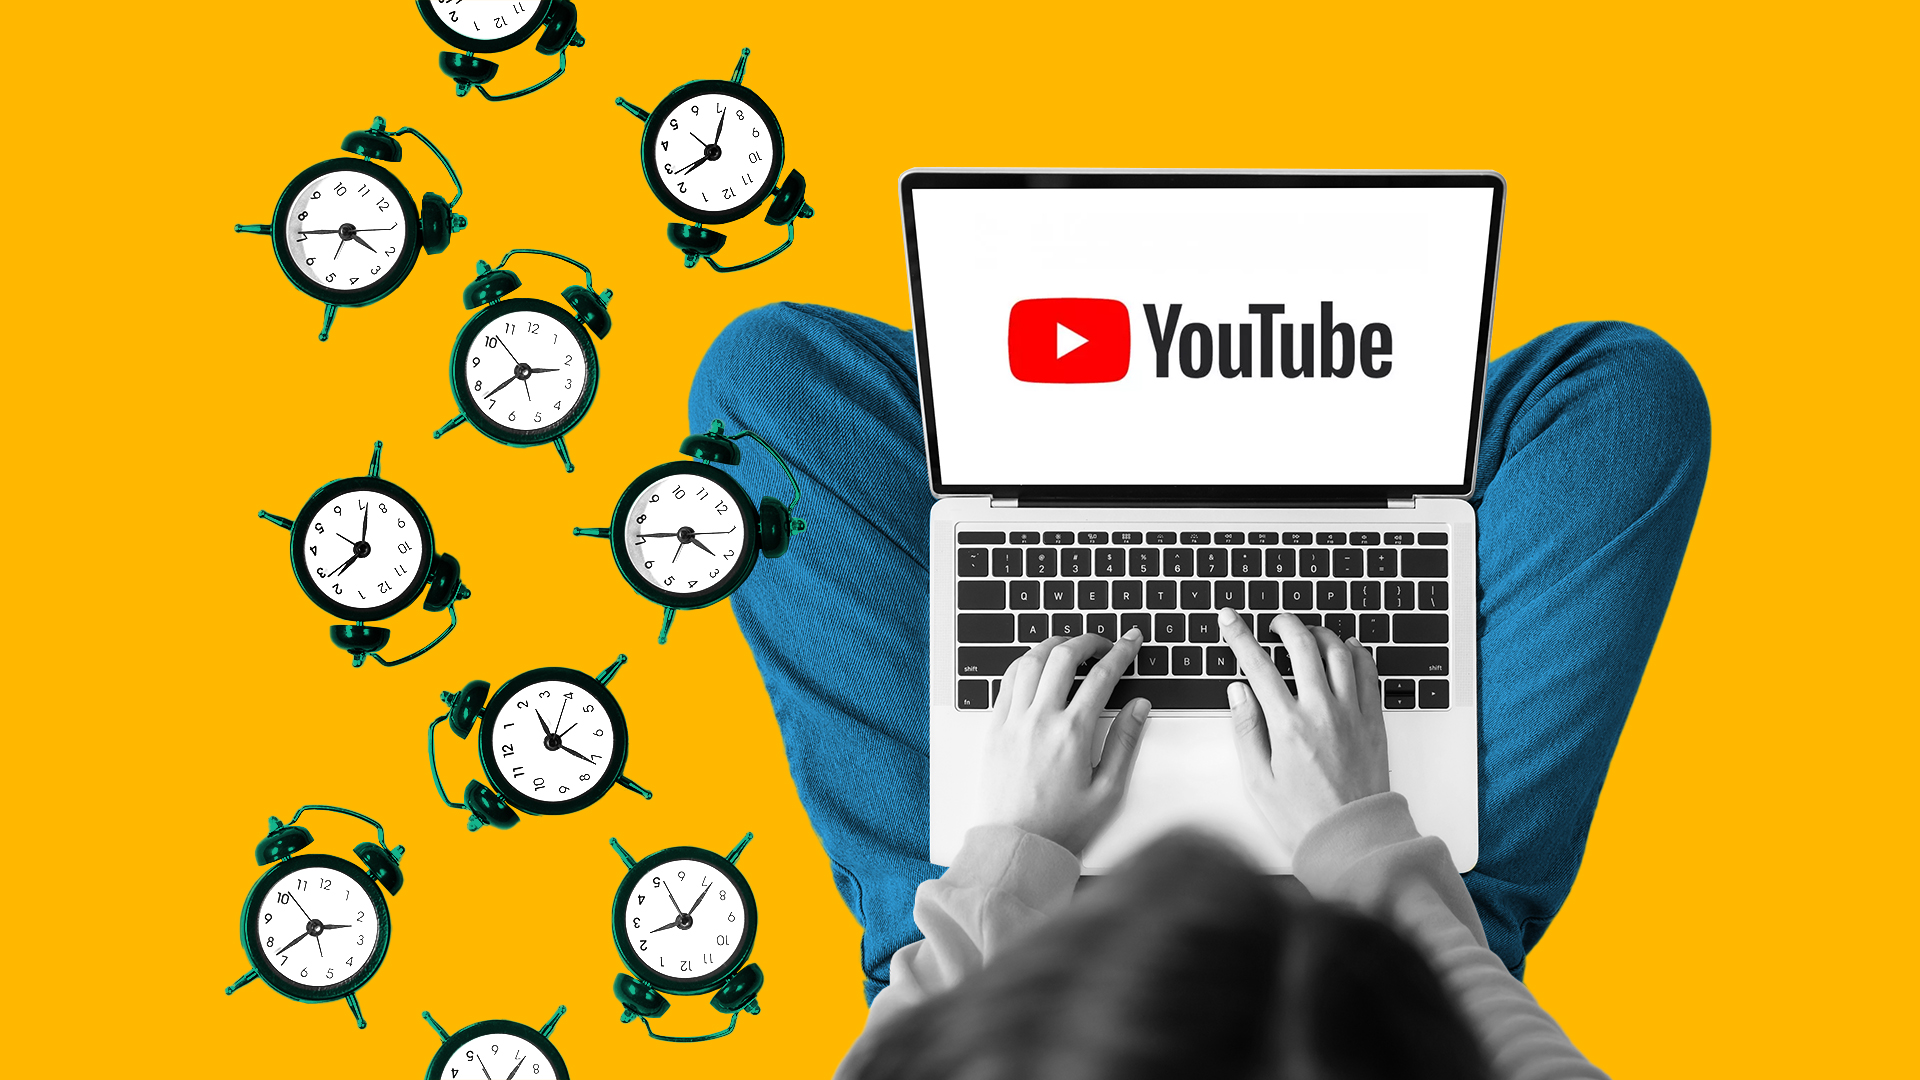 This image has a yellow background with a person sitting down. They have a laptop in their lap and are trying. On the screen, you can see the YouTube logo. To the left, there are several clocks. This represents the best time to post on YouTube.